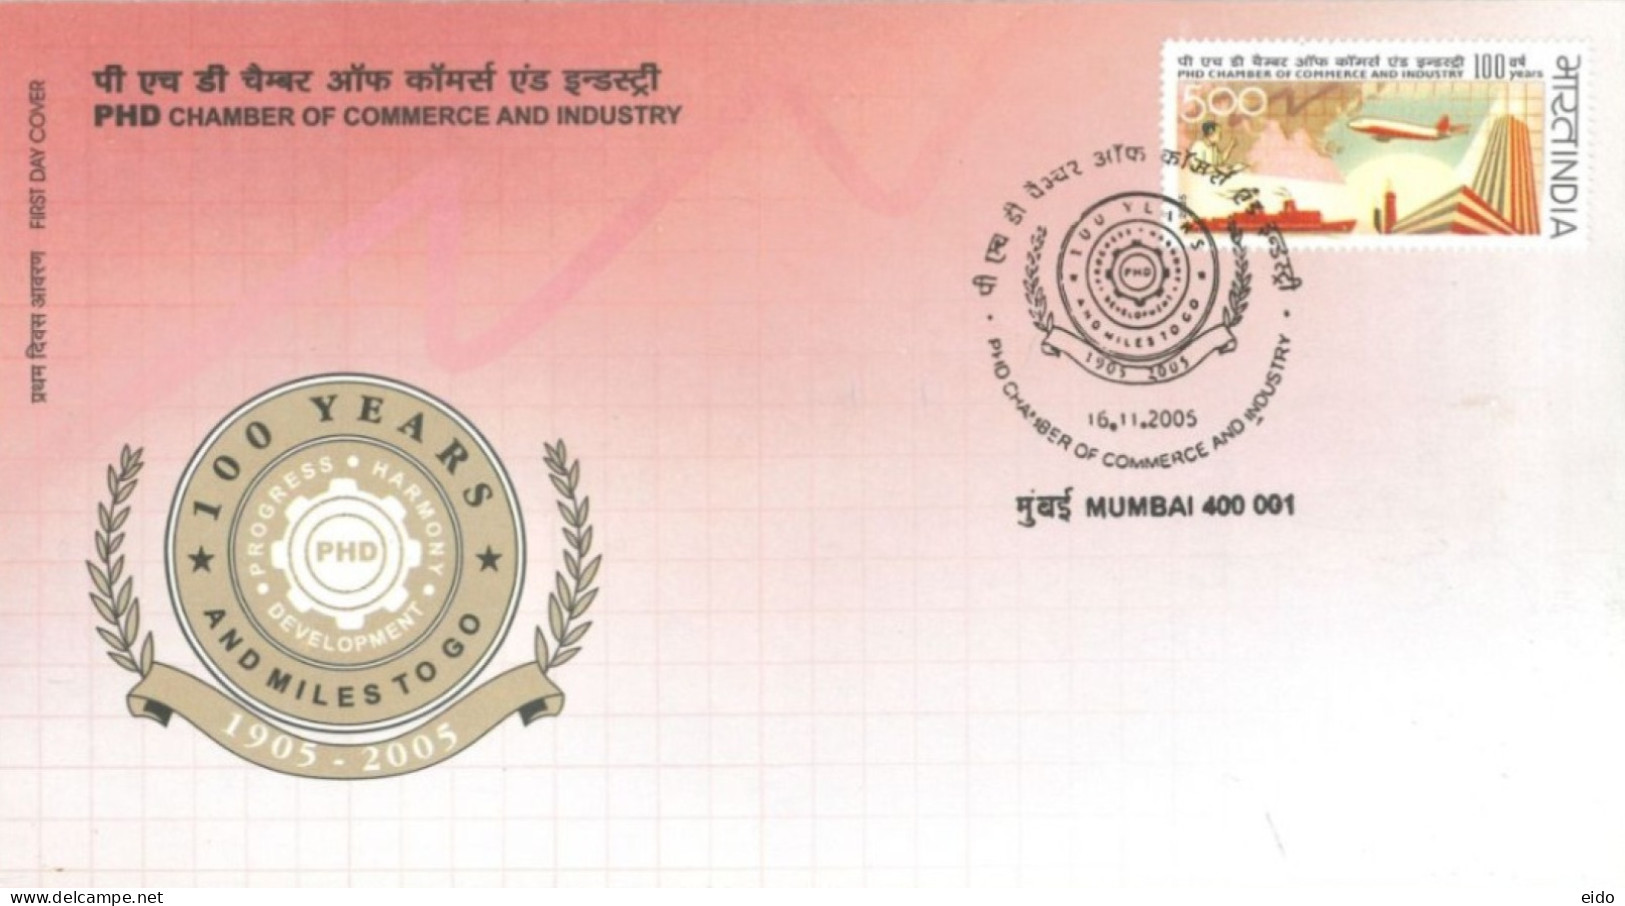 INDIA - 2005 - FDC STAMP OF PHD CHAMBER OF COMMERCE AND INDUSTRY. - Covers & Documents